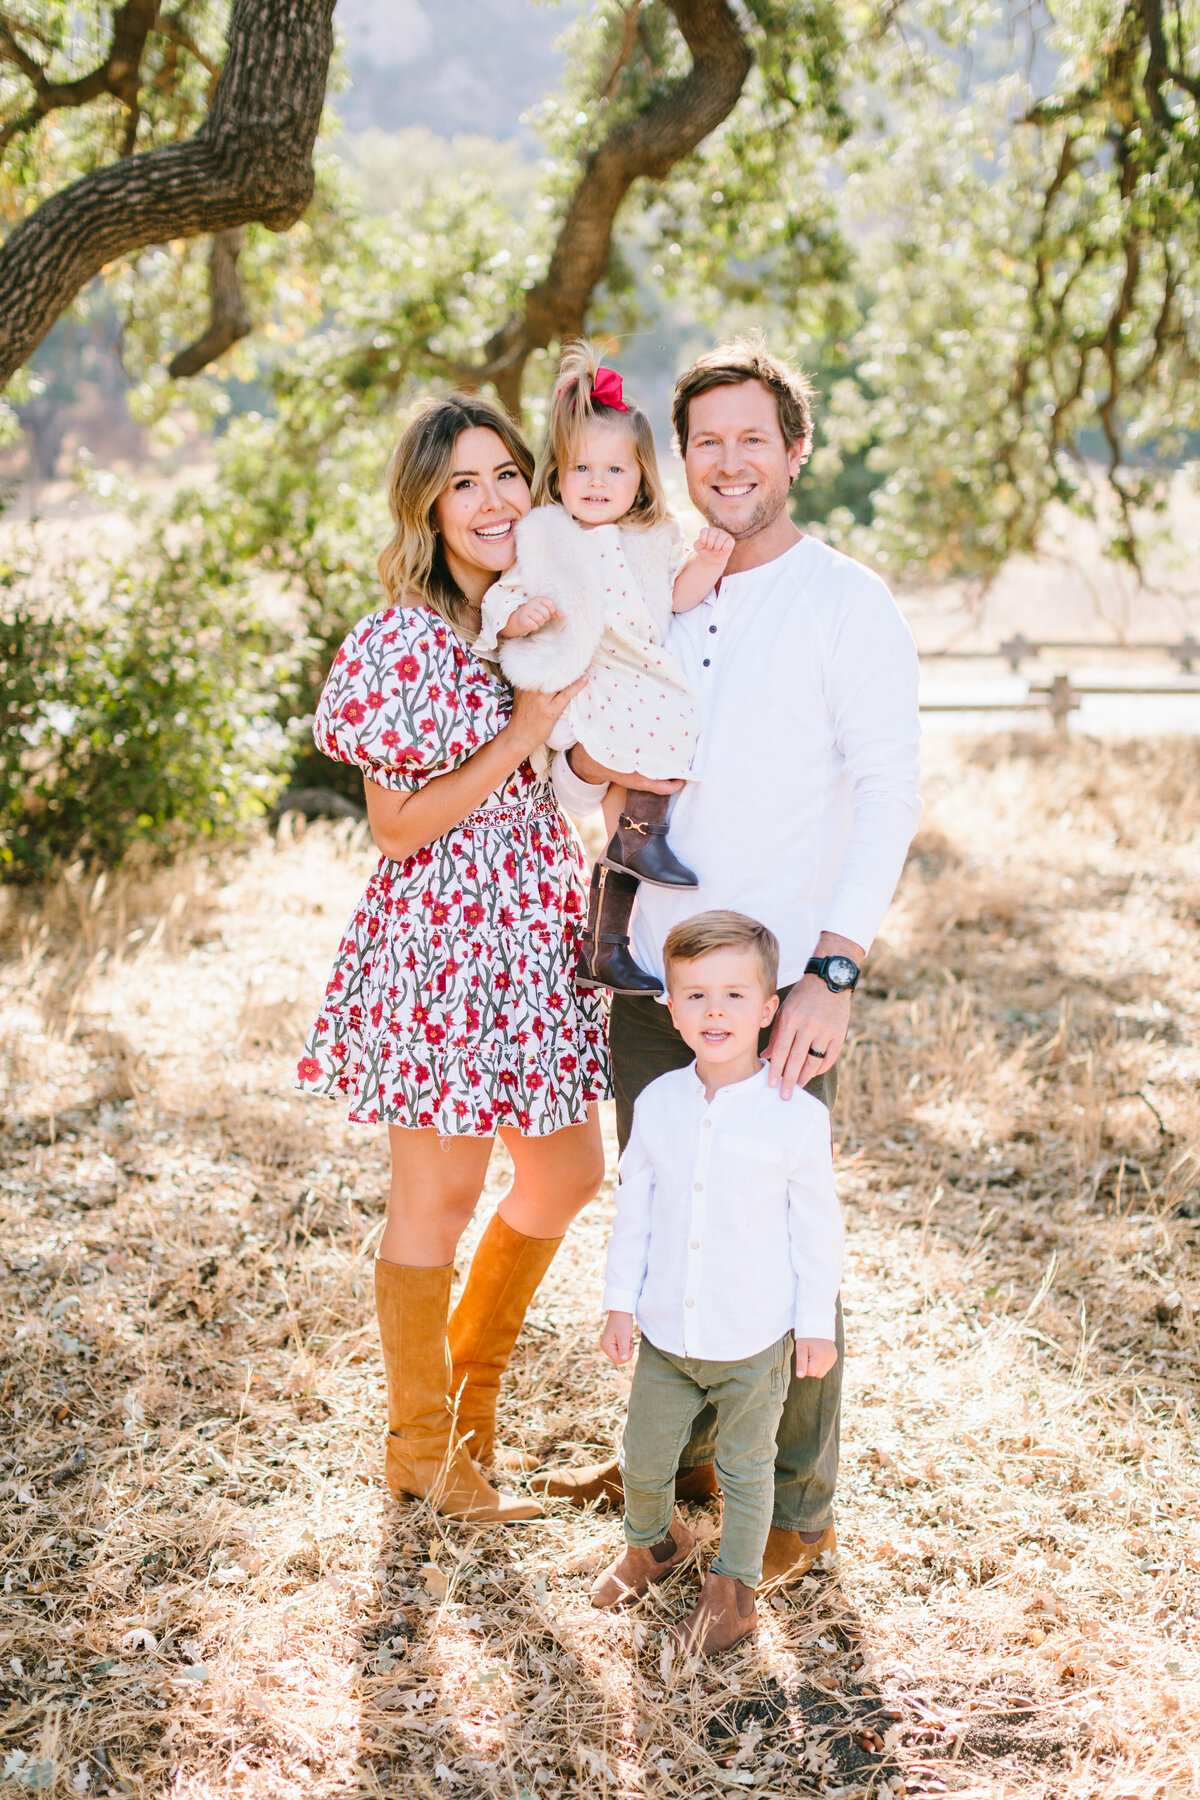 Best California and Texas Family Photographer-Jodee Debes Photography-32